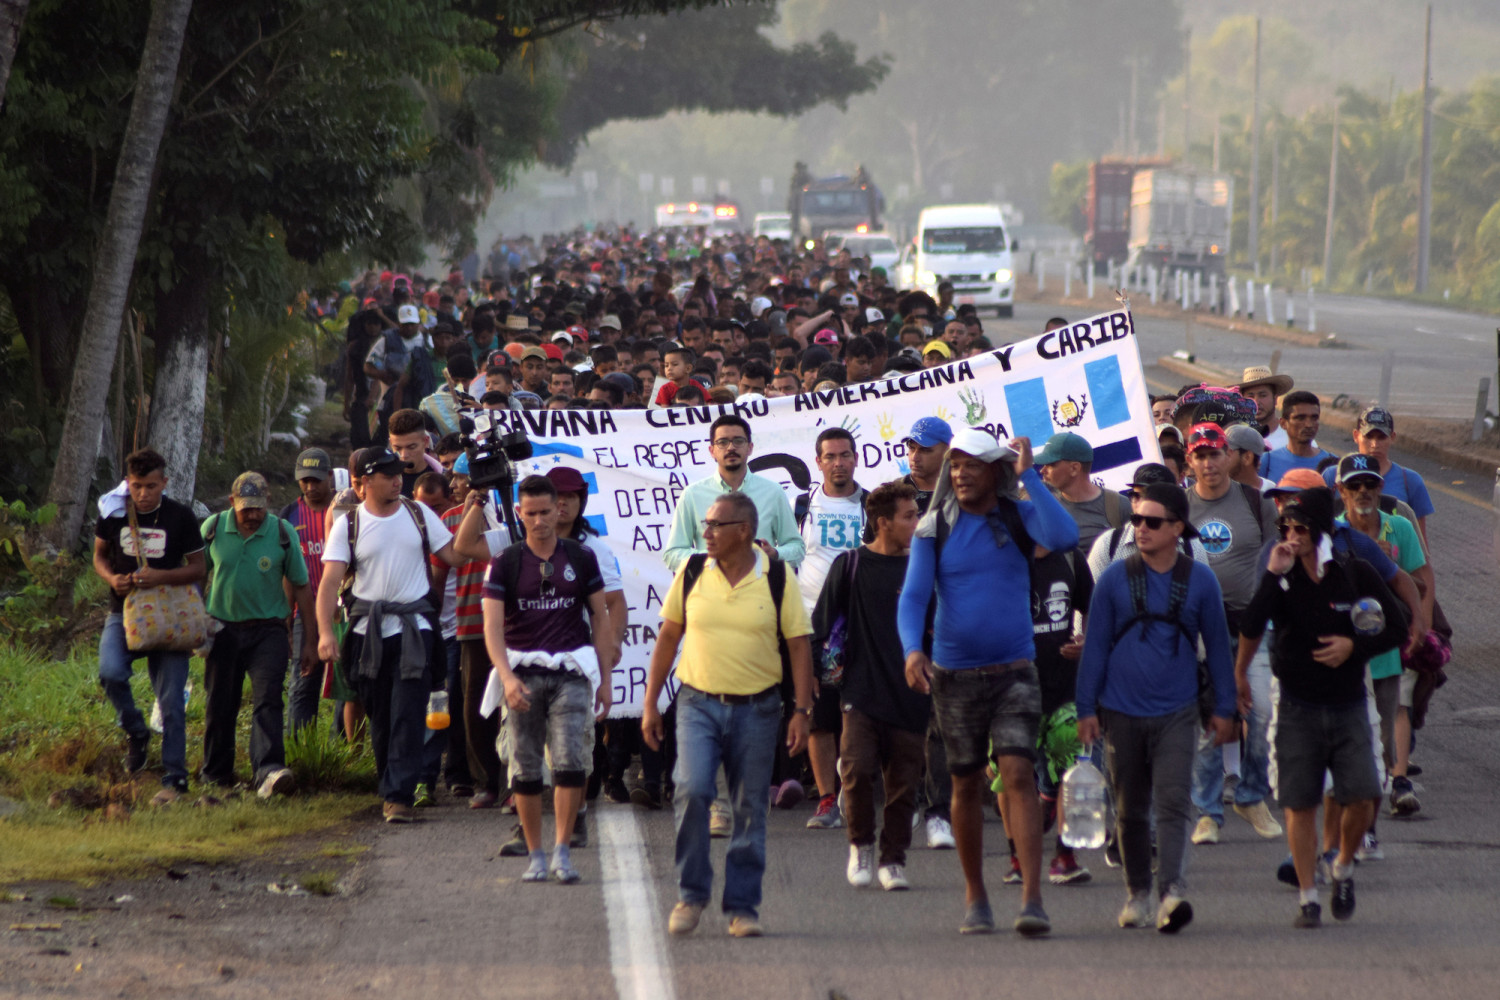 20,000-Member ‘Mother of All Caravans’ Forming in Honduras, Says Mexico